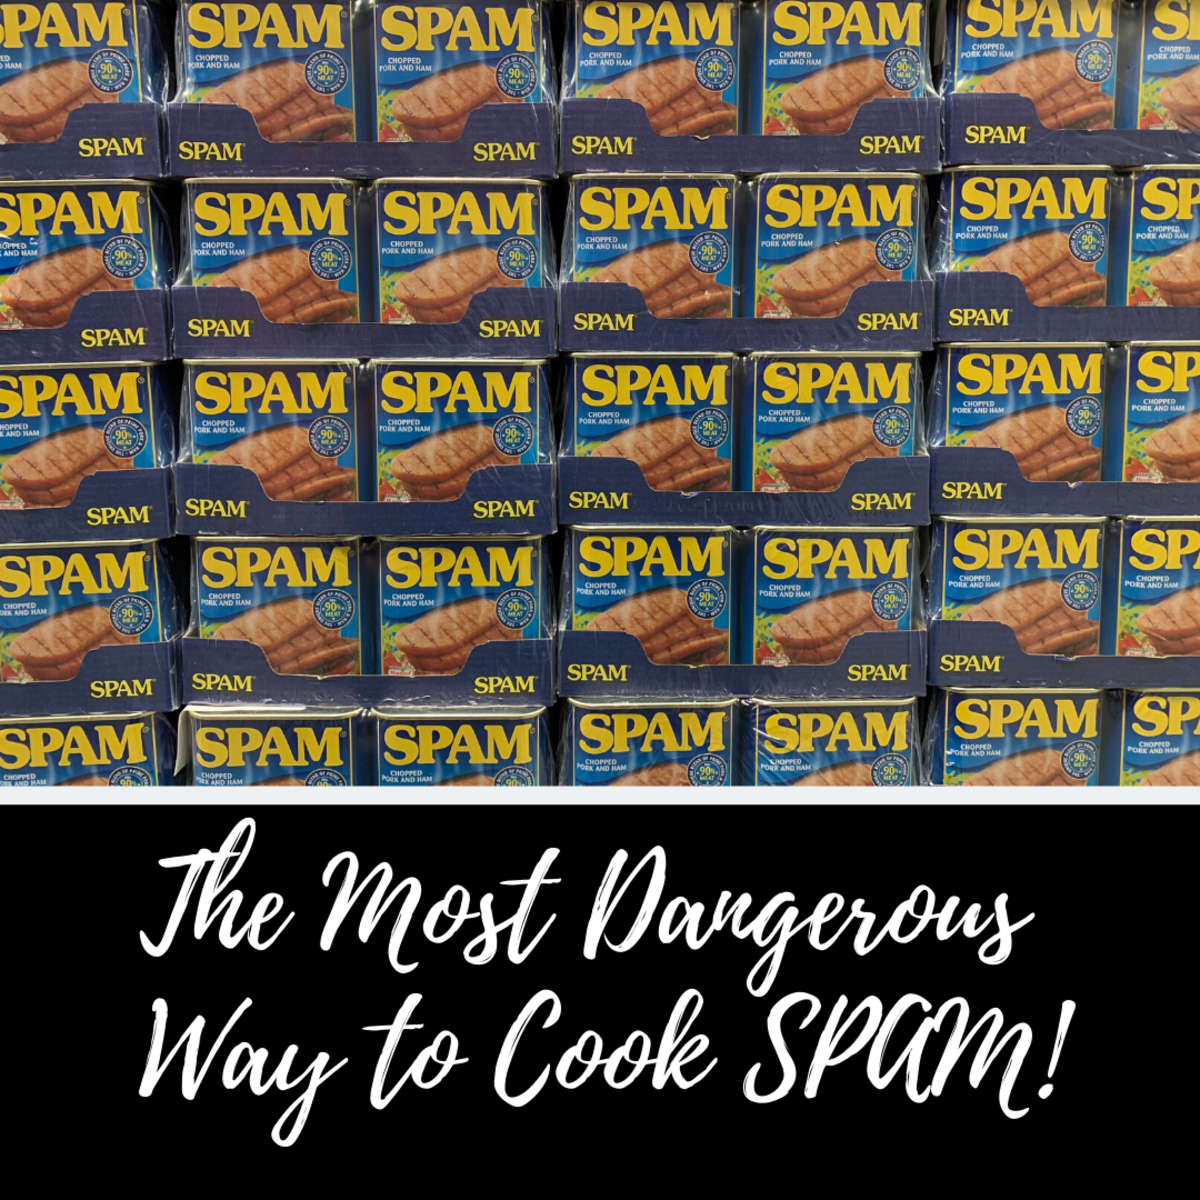 Canned foods can be dangerous if cooked wrong. Read on to learn more. 